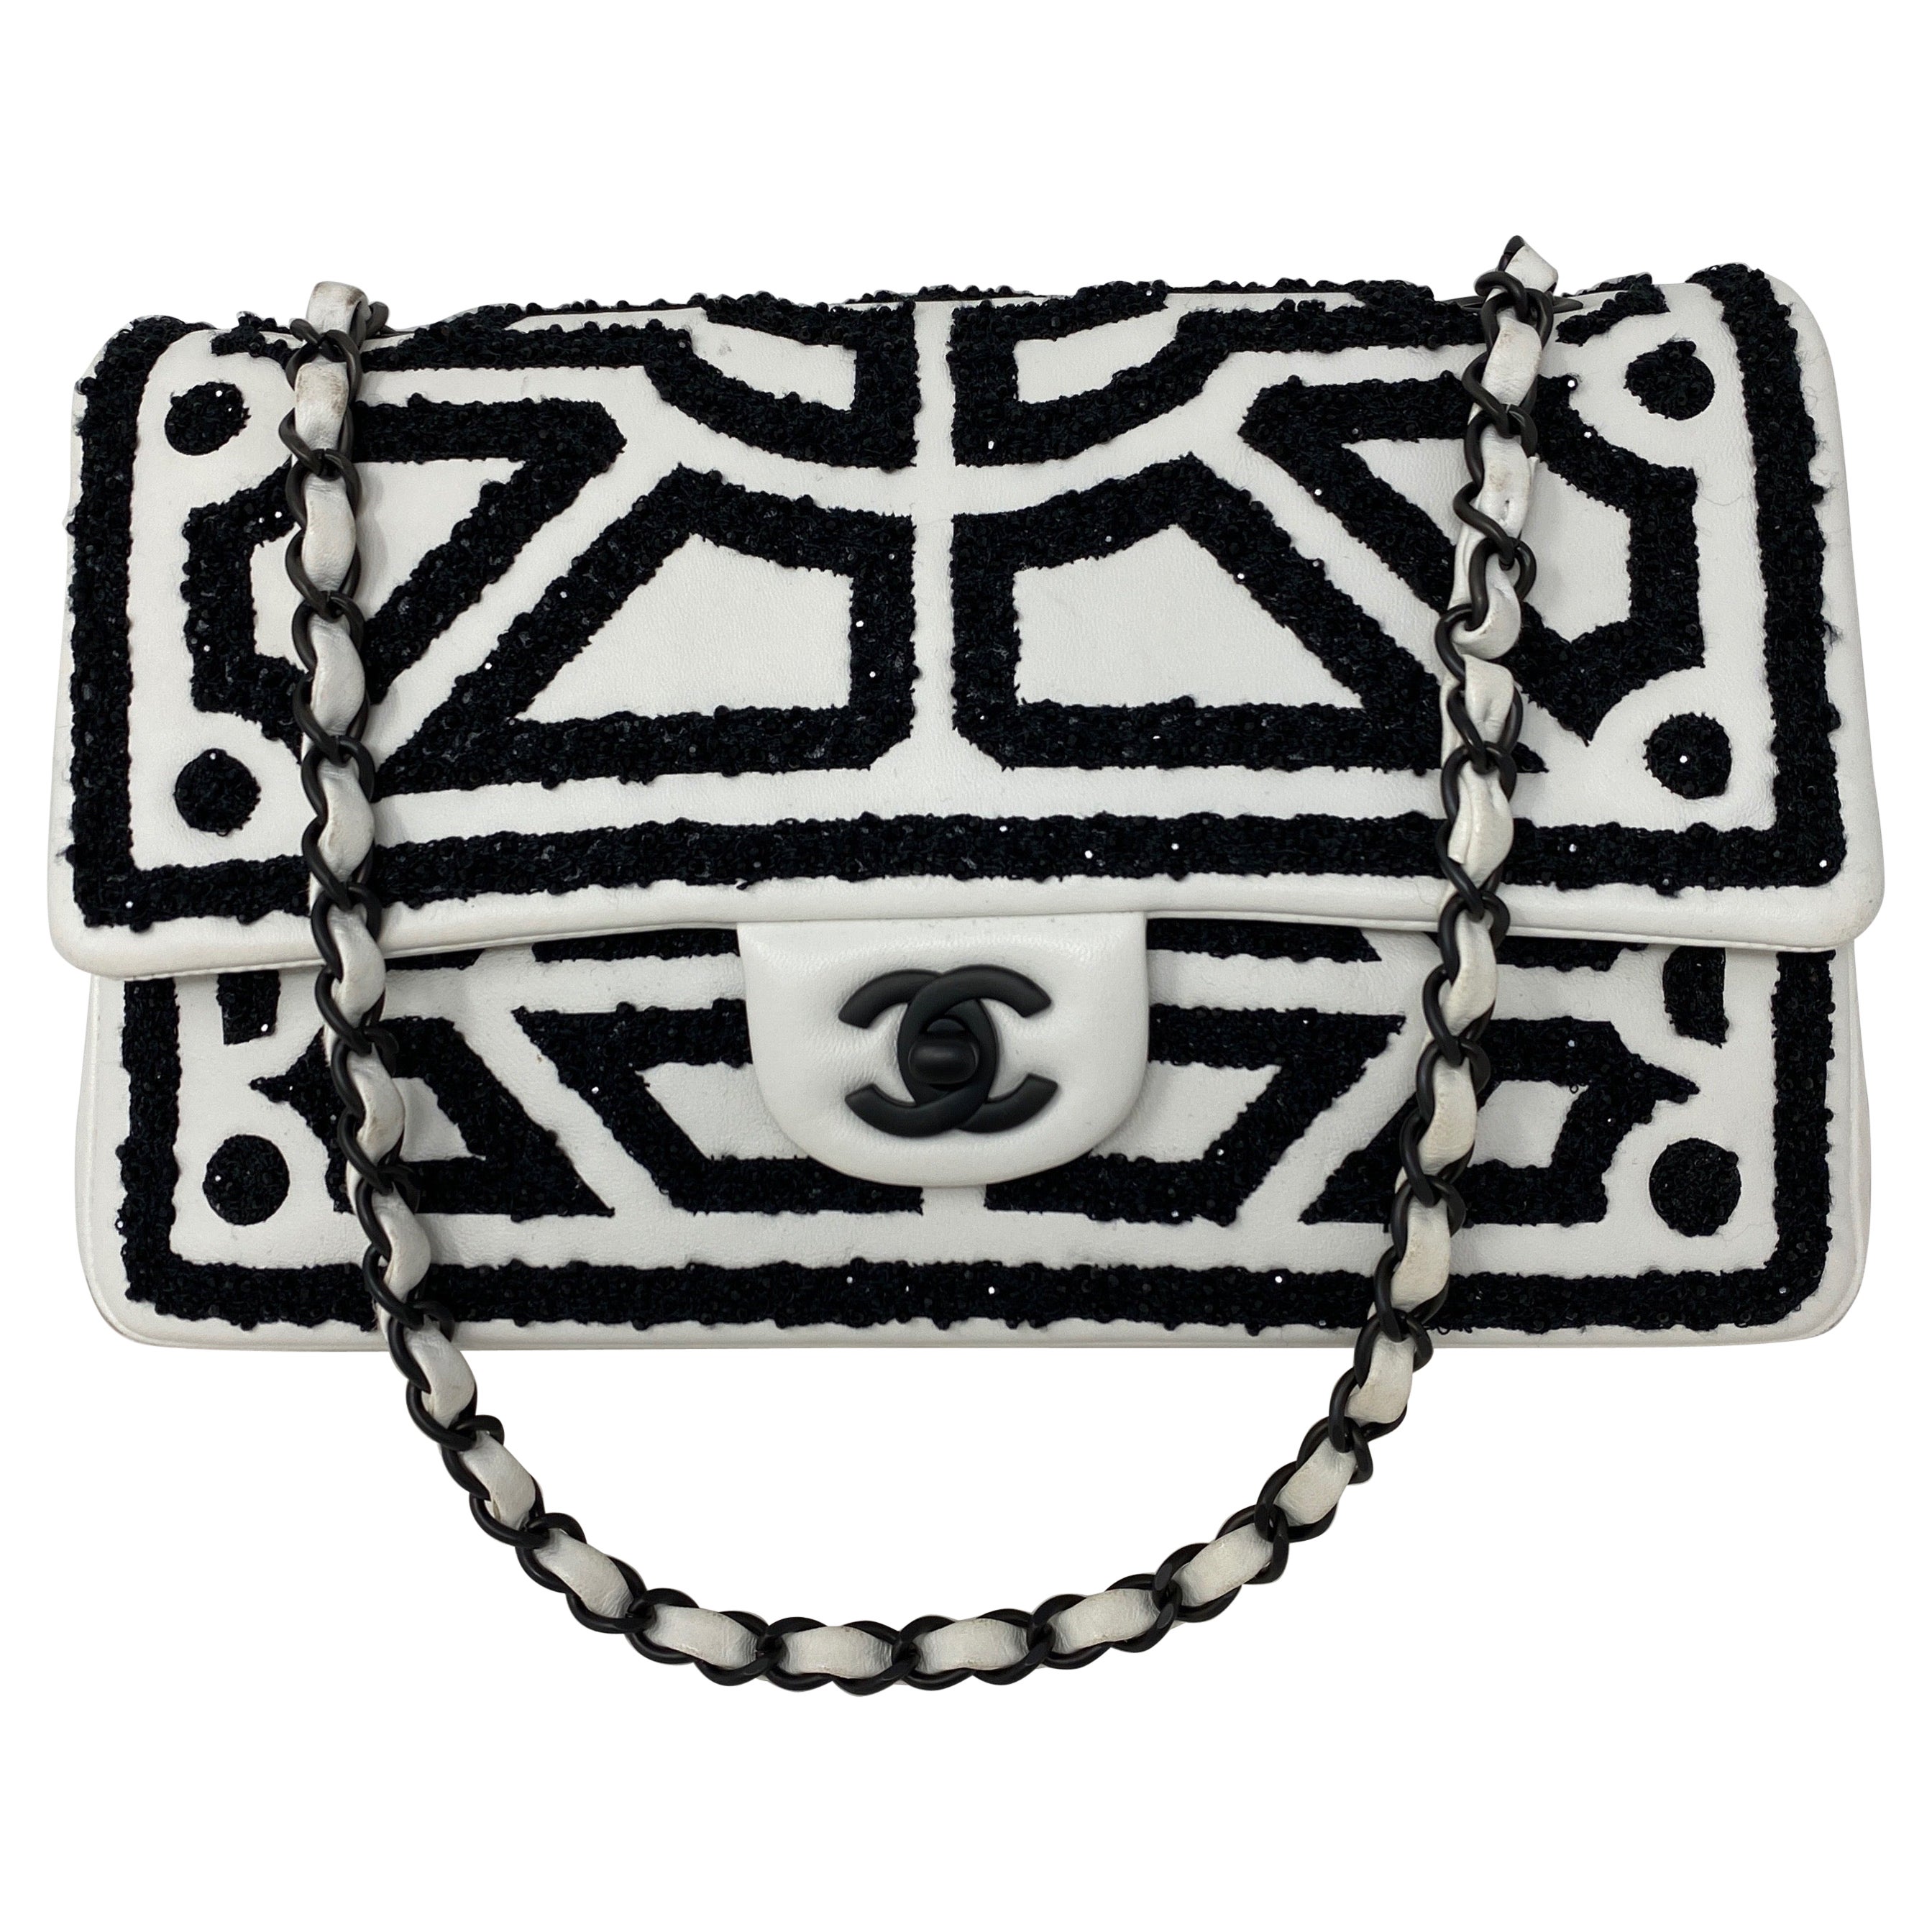 Chanel White and Black Double Flap Bag